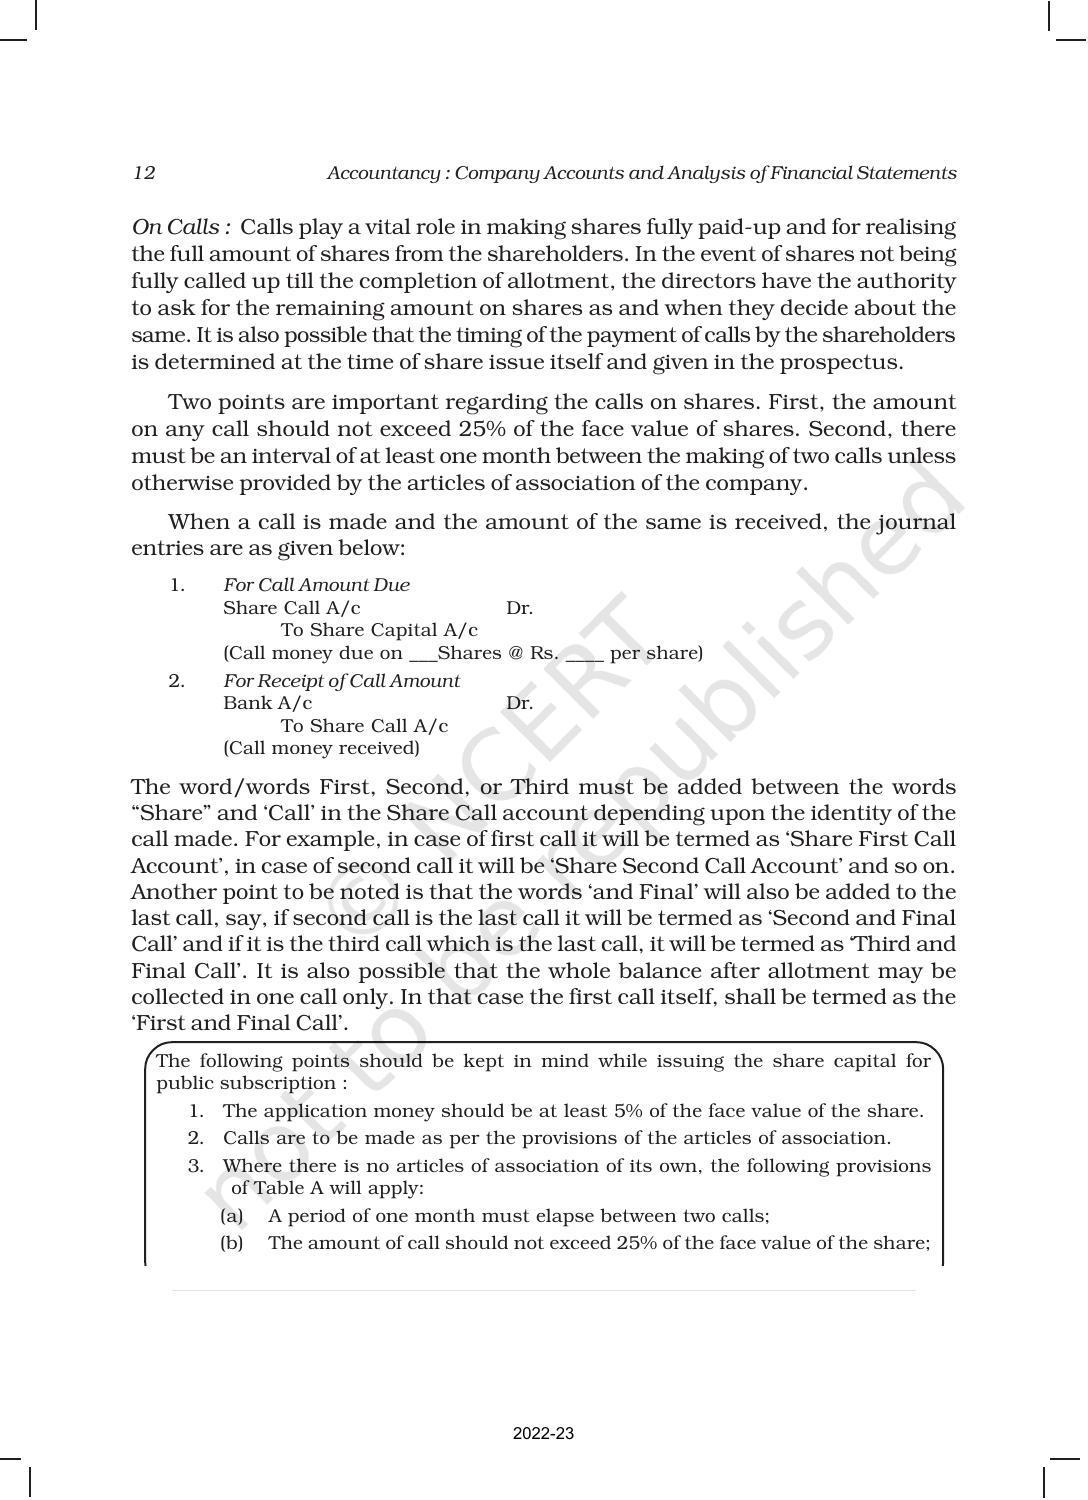 NCERT Book for Class 12 Accountancy Part II Chapter 1 Accounting for Share Capital - Page 12